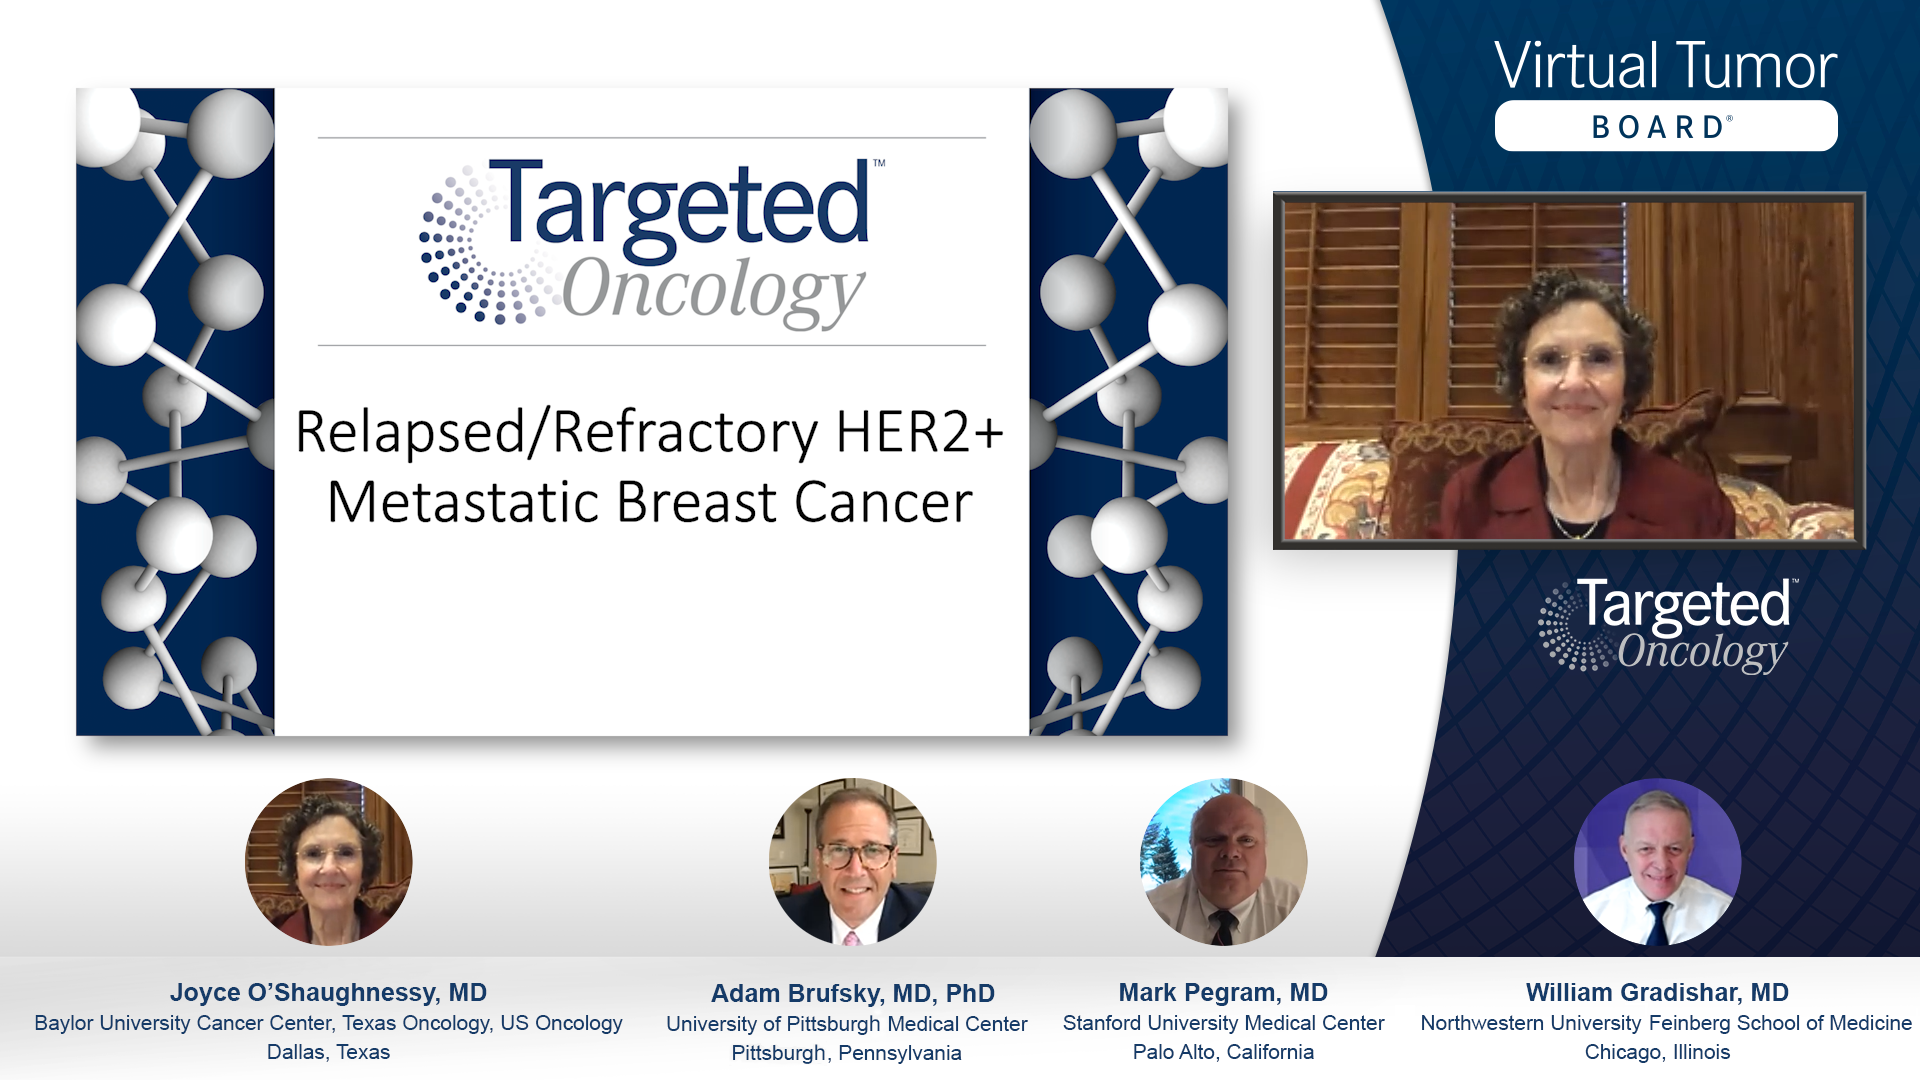 Relapsed/Refractory HER2+ Metastatic Breast Cancer